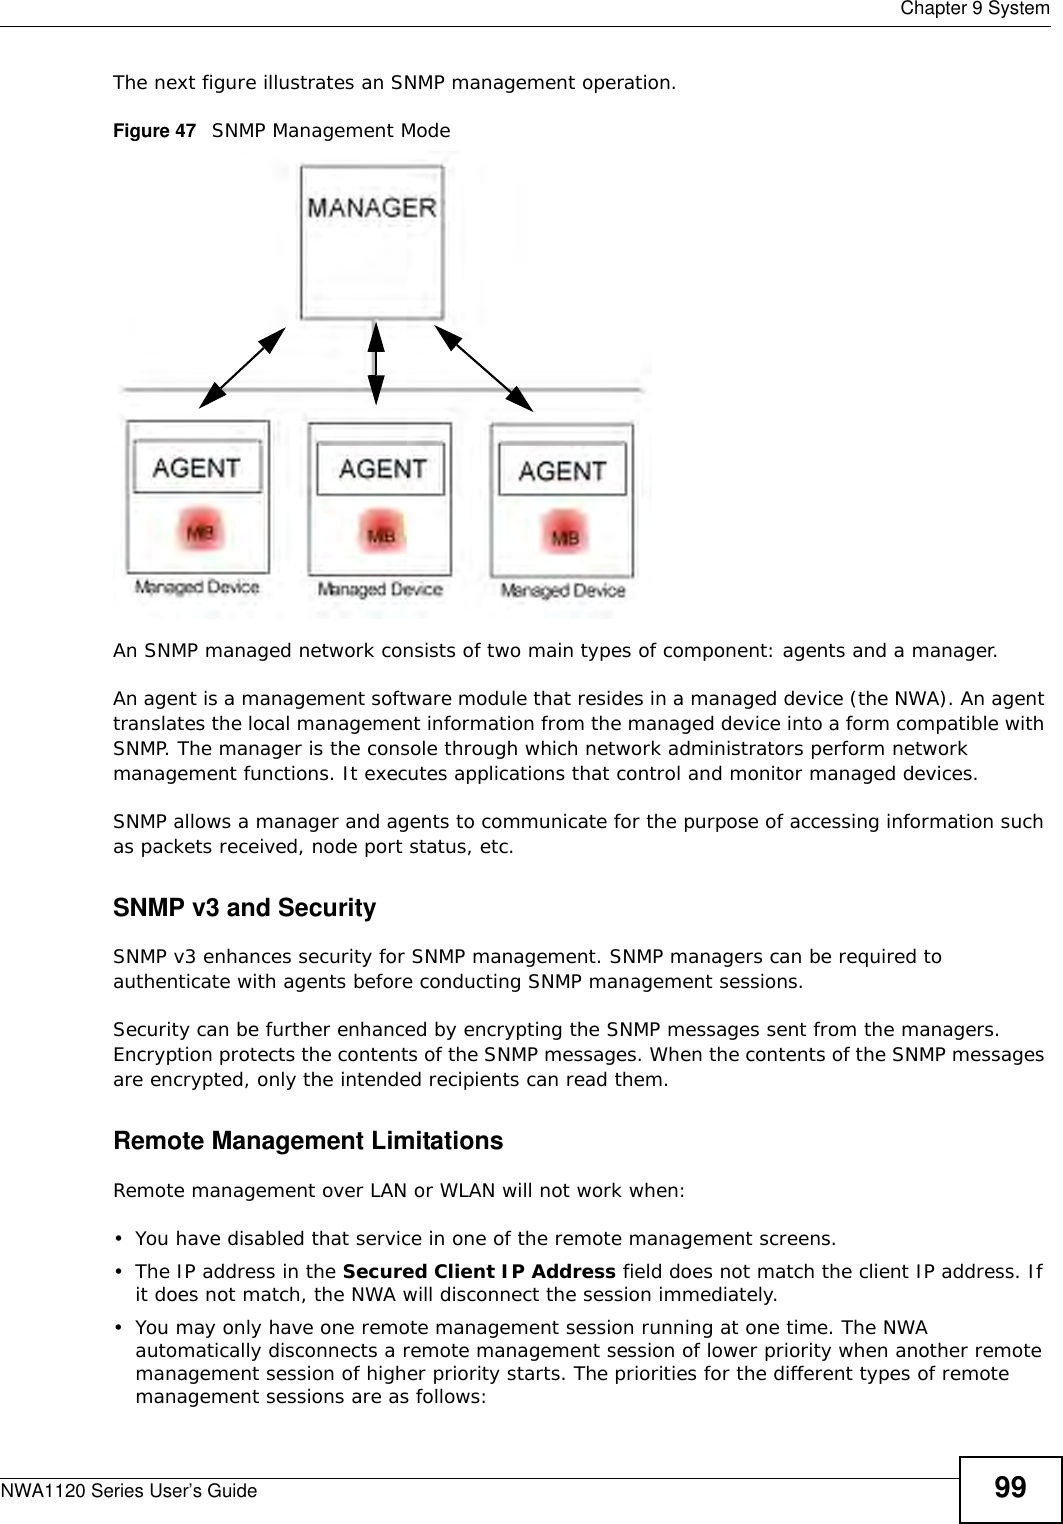  Chapter 9 SystemNWA1120 Series User’s Guide 99The next figure illustrates an SNMP management operation. Figure 47   SNMP Management ModeAn SNMP managed network consists of two main types of component: agents and a manager. An agent is a management software module that resides in a managed device (the NWA). An agent translates the local management information from the managed device into a form compatible with SNMP. The manager is the console through which network administrators perform network management functions. It executes applications that control and monitor managed devices. SNMP allows a manager and agents to communicate for the purpose of accessing information such as packets received, node port status, etc.SNMP v3 and SecuritySNMP v3 enhances security for SNMP management. SNMP managers can be required to authenticate with agents before conducting SNMP management sessions.Security can be further enhanced by encrypting the SNMP messages sent from the managers. Encryption protects the contents of the SNMP messages. When the contents of the SNMP messages are encrypted, only the intended recipients can read them.Remote Management LimitationsRemote management over LAN or WLAN will not work when:• You have disabled that service in one of the remote management screens.• The IP address in the Secured Client IP Address field does not match the client IP address. If it does not match, the NWA will disconnect the session immediately.• You may only have one remote management session running at one time. The NWA automatically disconnects a remote management session of lower priority when another remote management session of higher priority starts. The priorities for the different types of remote management sessions are as follows: